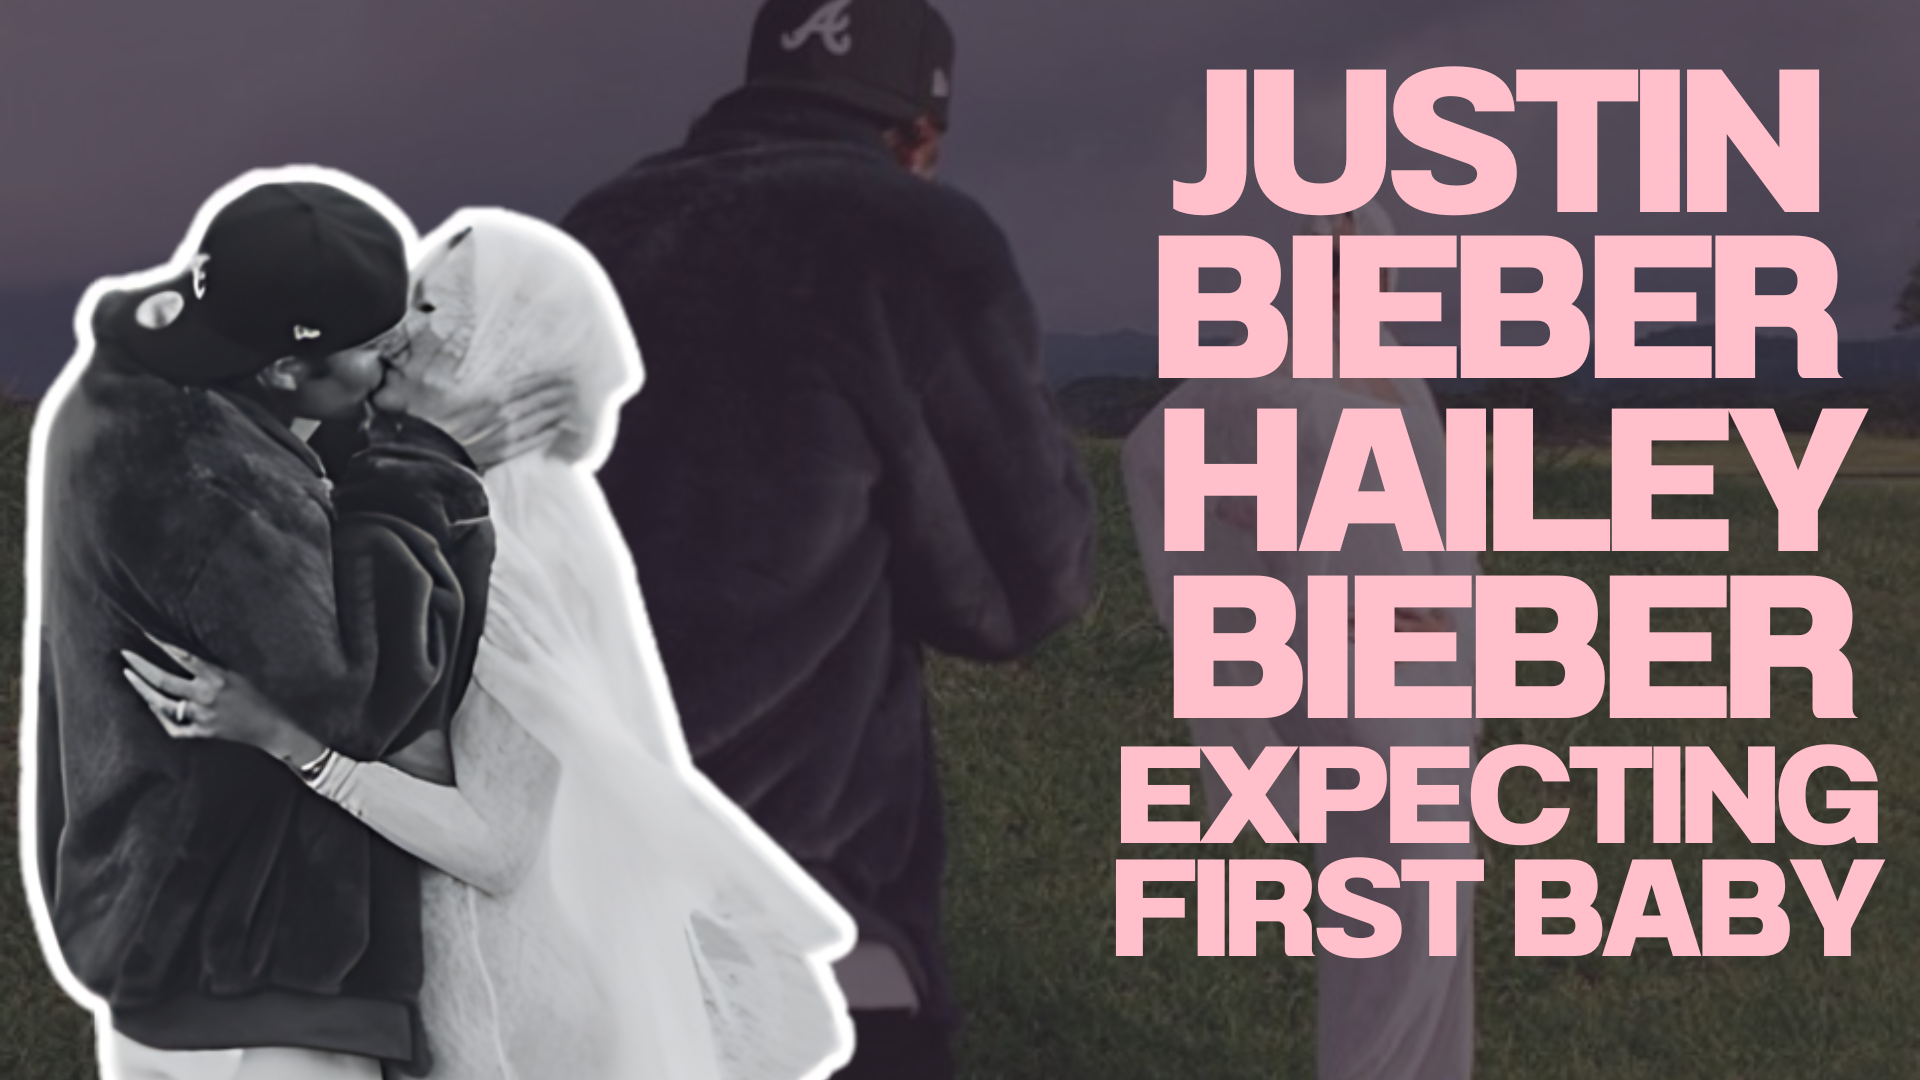 Justin Bieber And His Wife Hailey Baldwin Bieber Are Expecting Their First Child- See Their Adorable Pics Here!